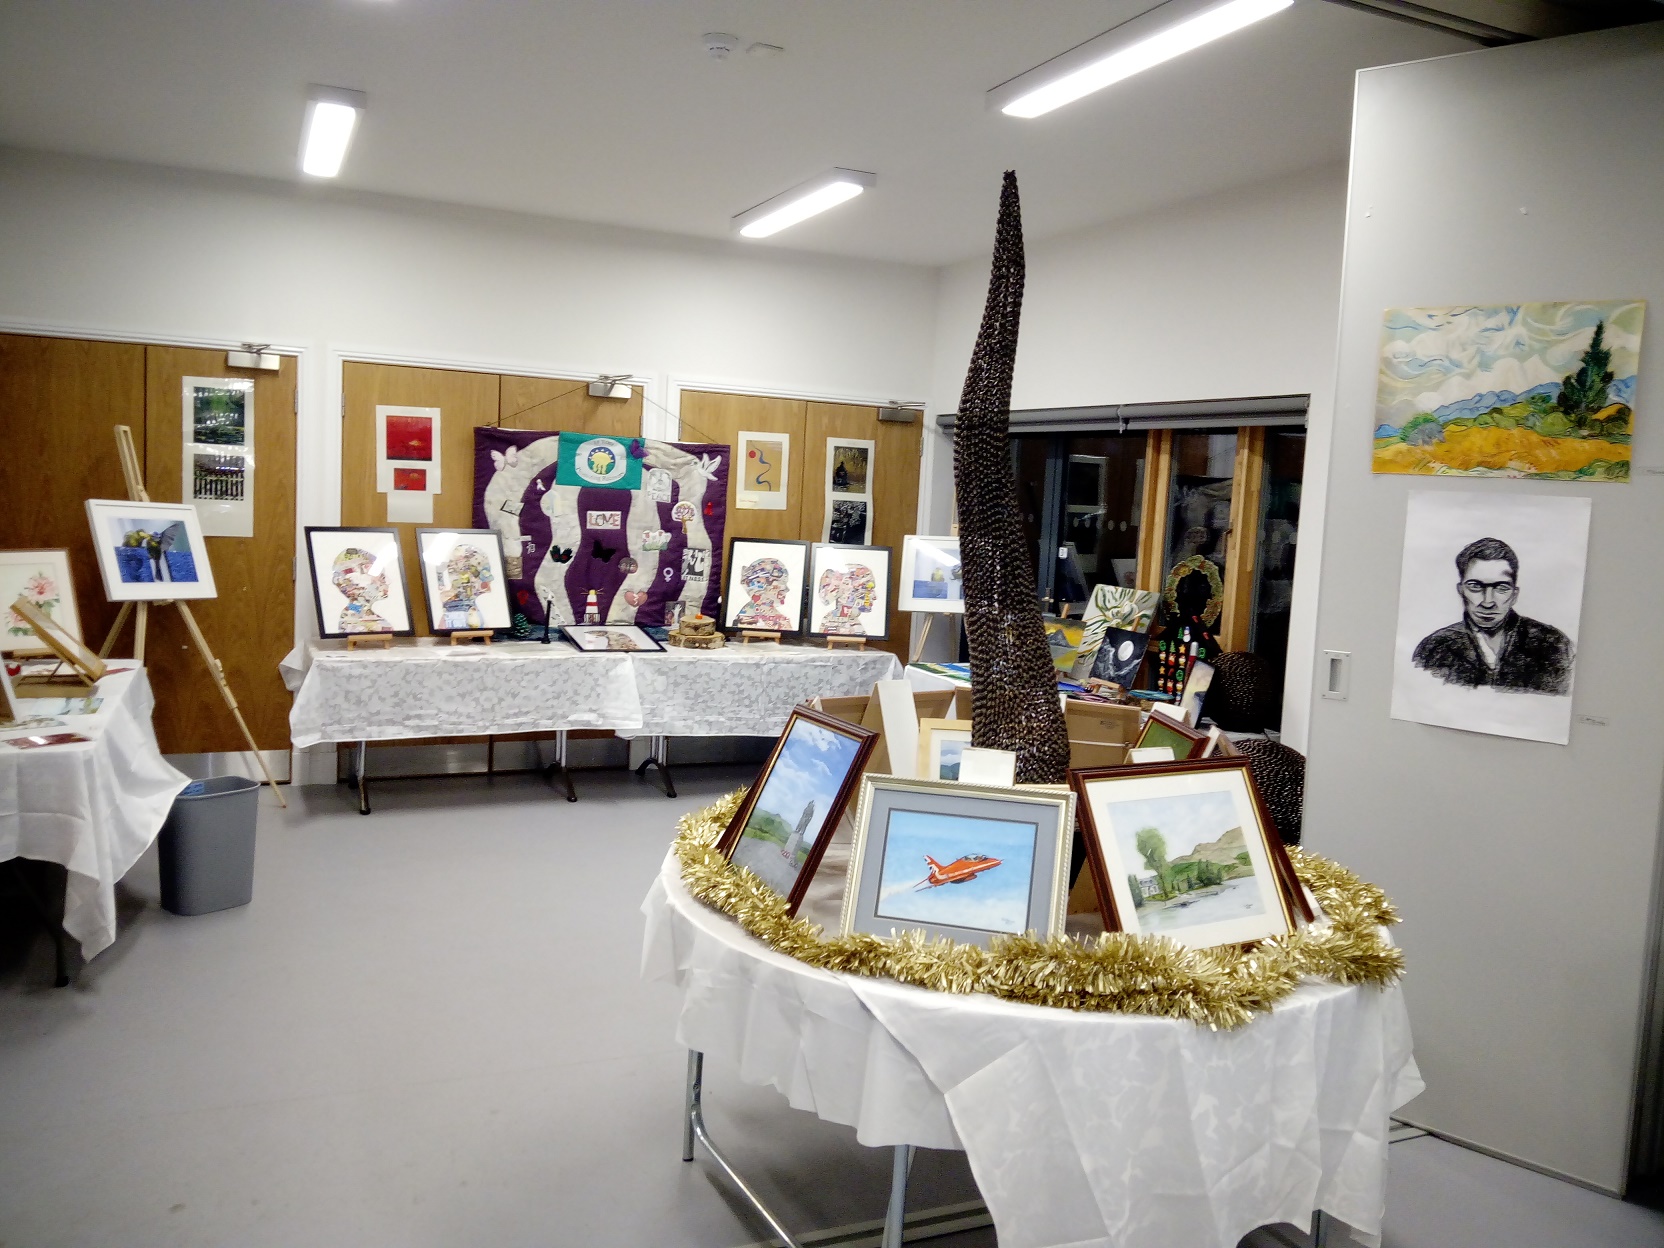 image of Art Exhibition - room setup and ready